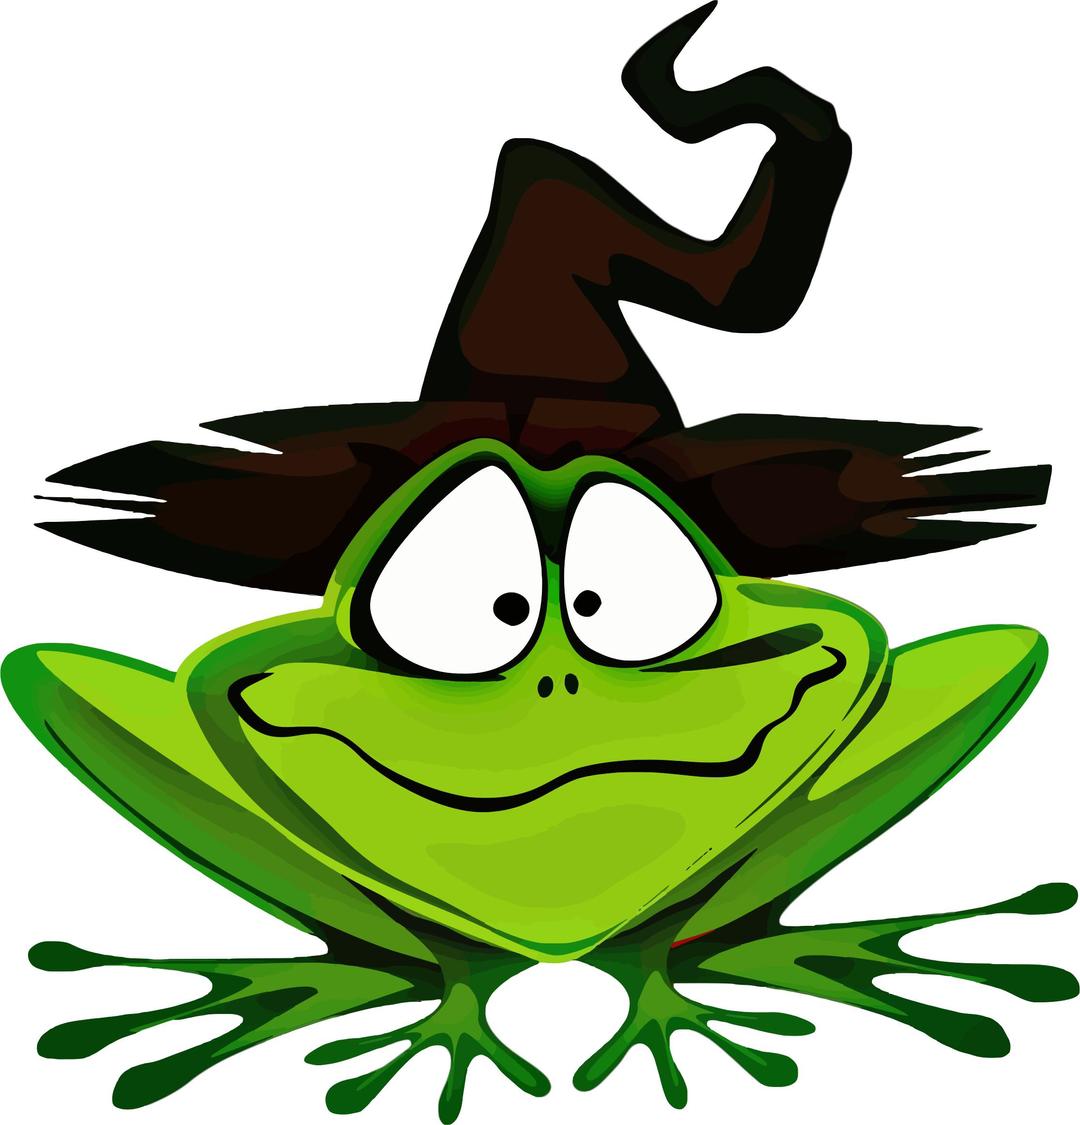 Frog Wearing Witch's Hat png transparent